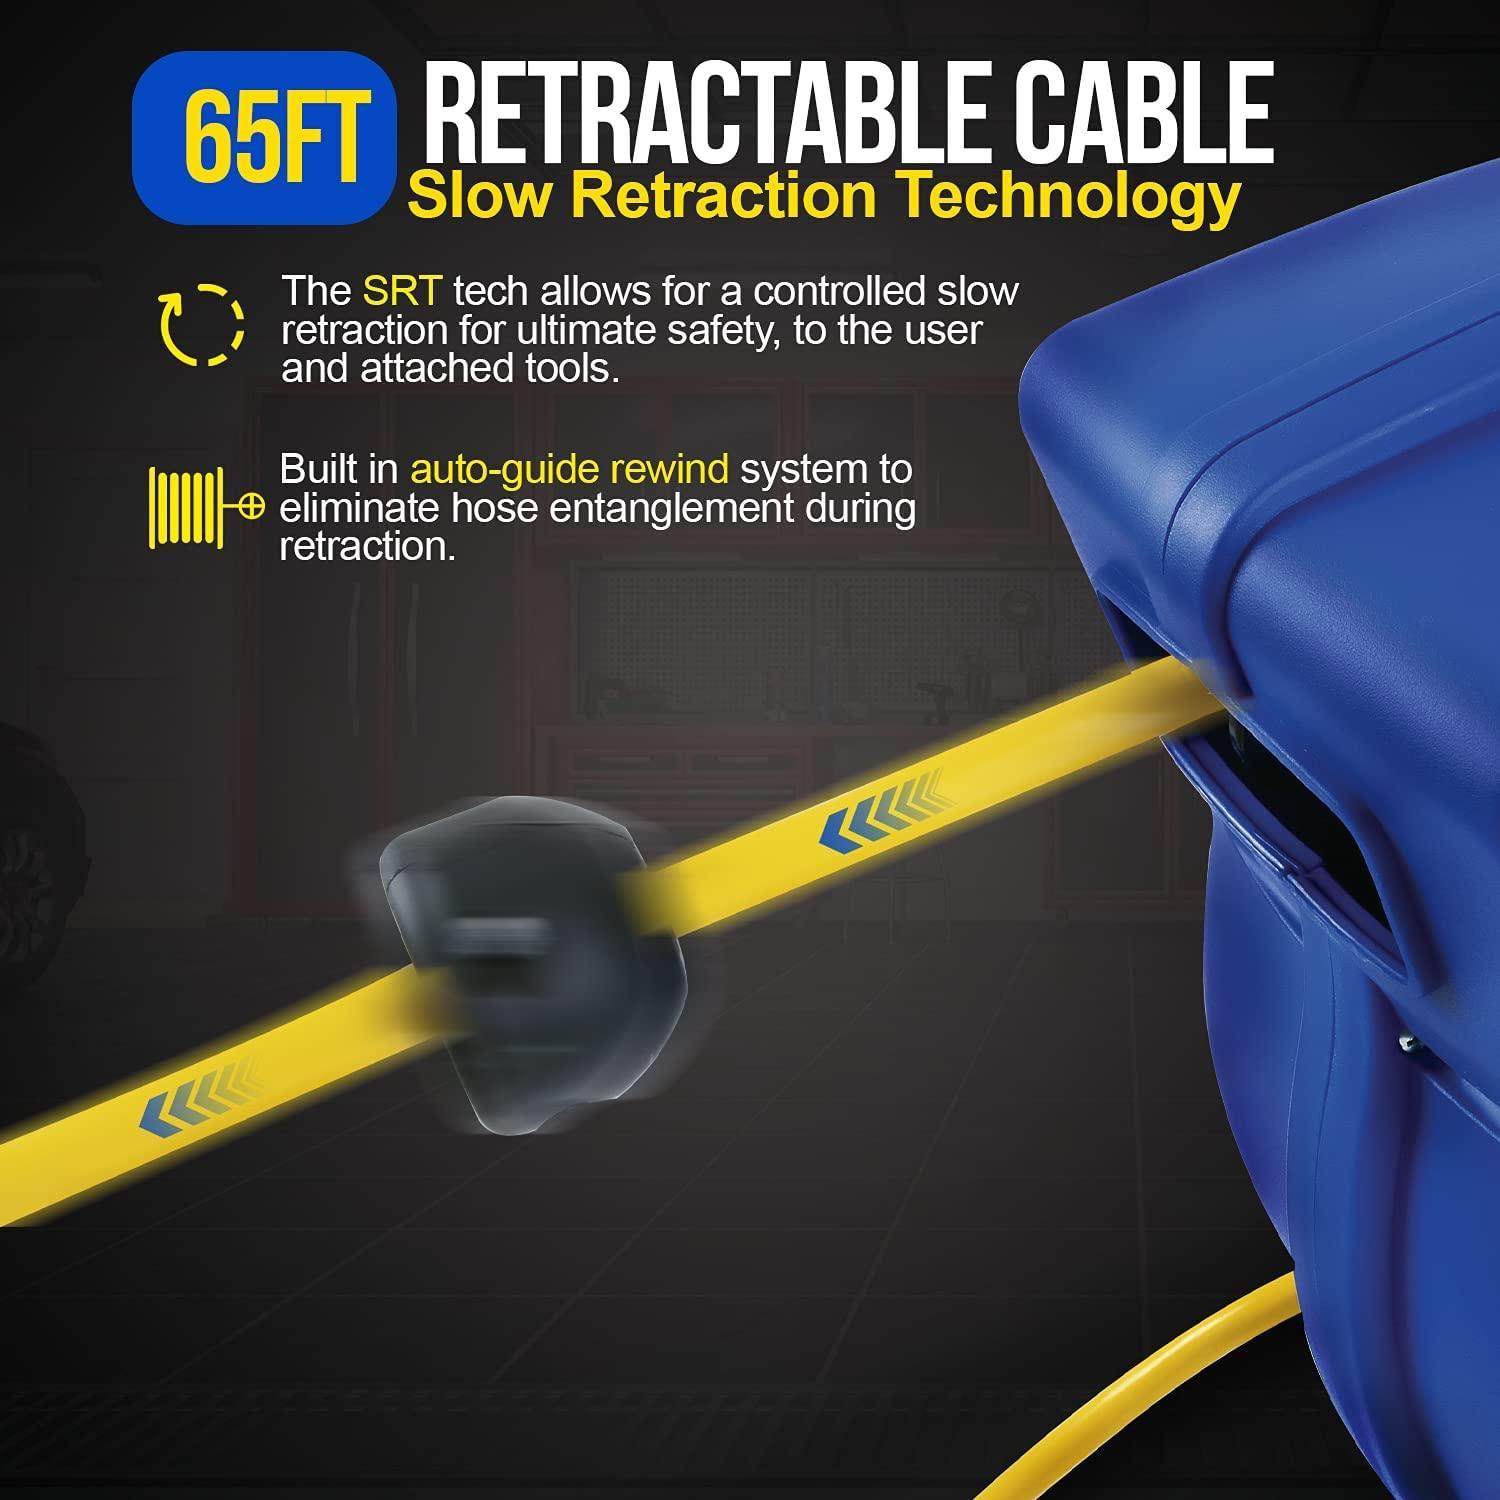 Goodyear Mountable Retractable Extension Cord Reel - 14AWG x 65' Ft, 3